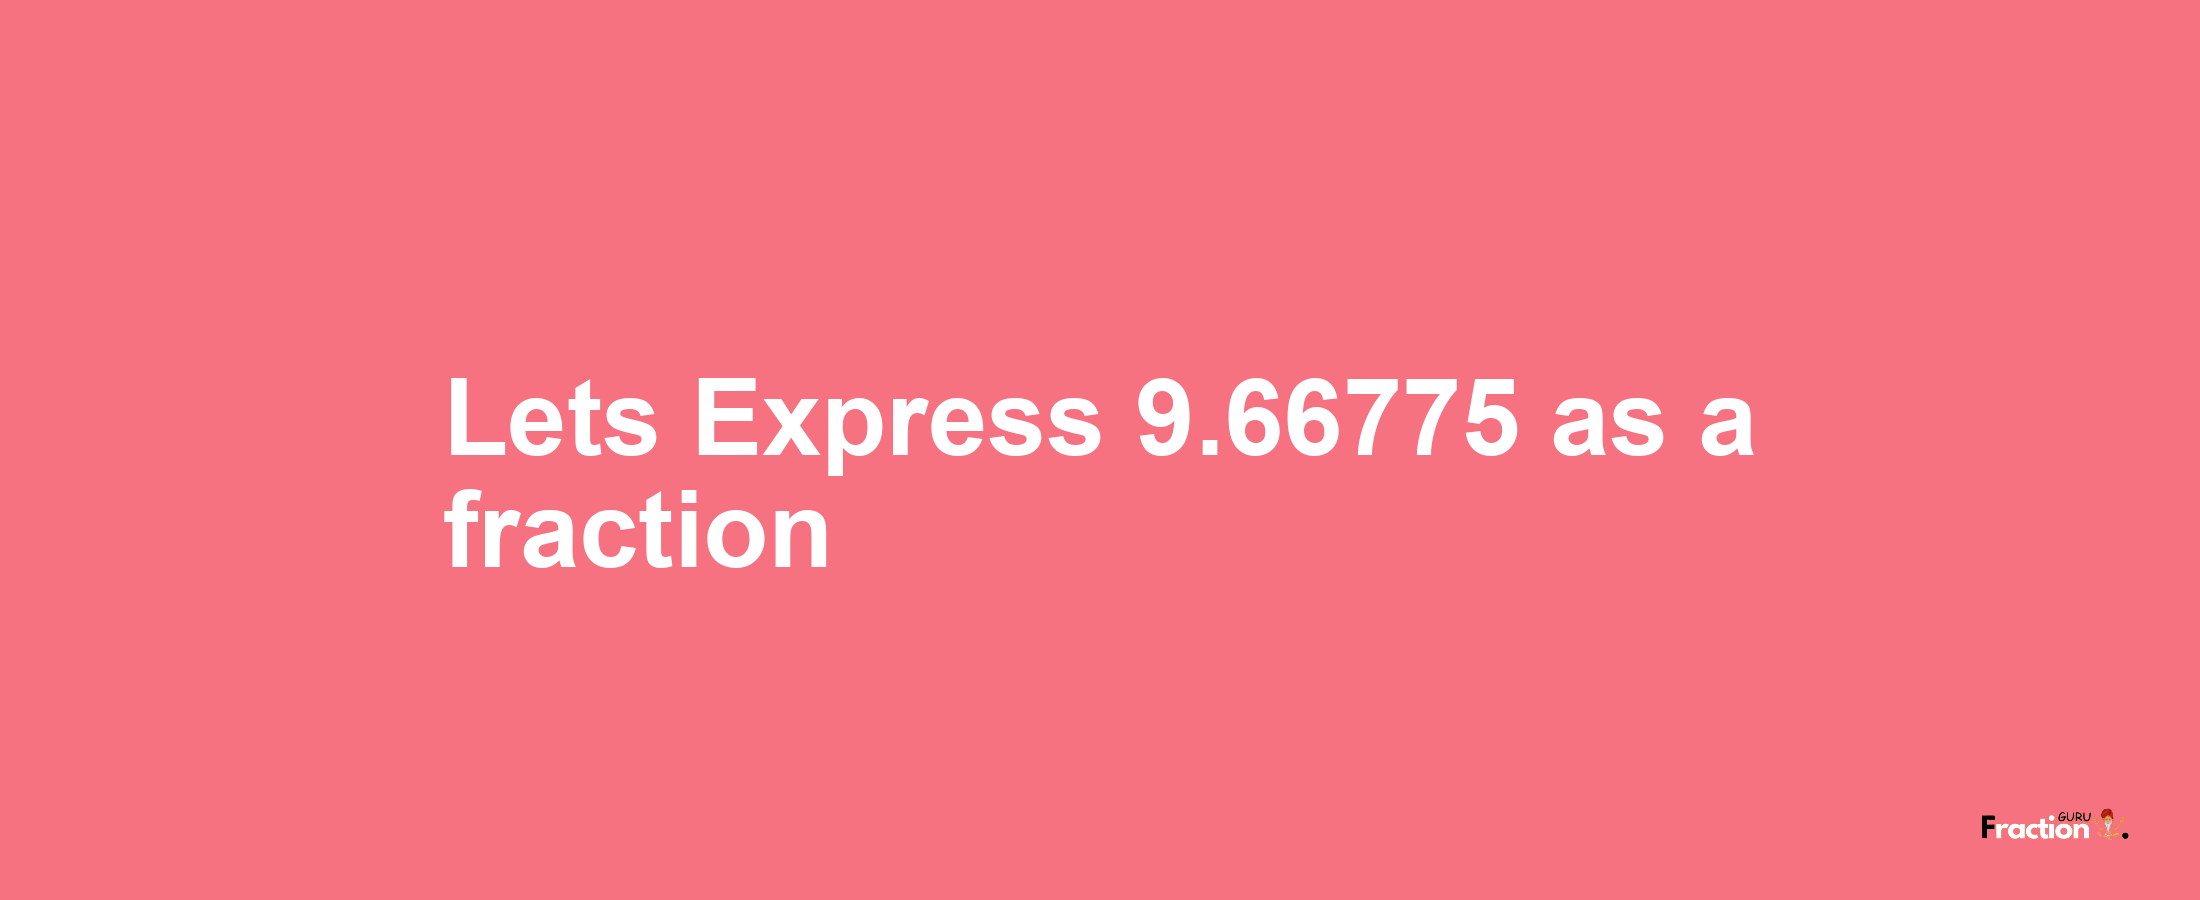 Lets Express 9.66775 as afraction